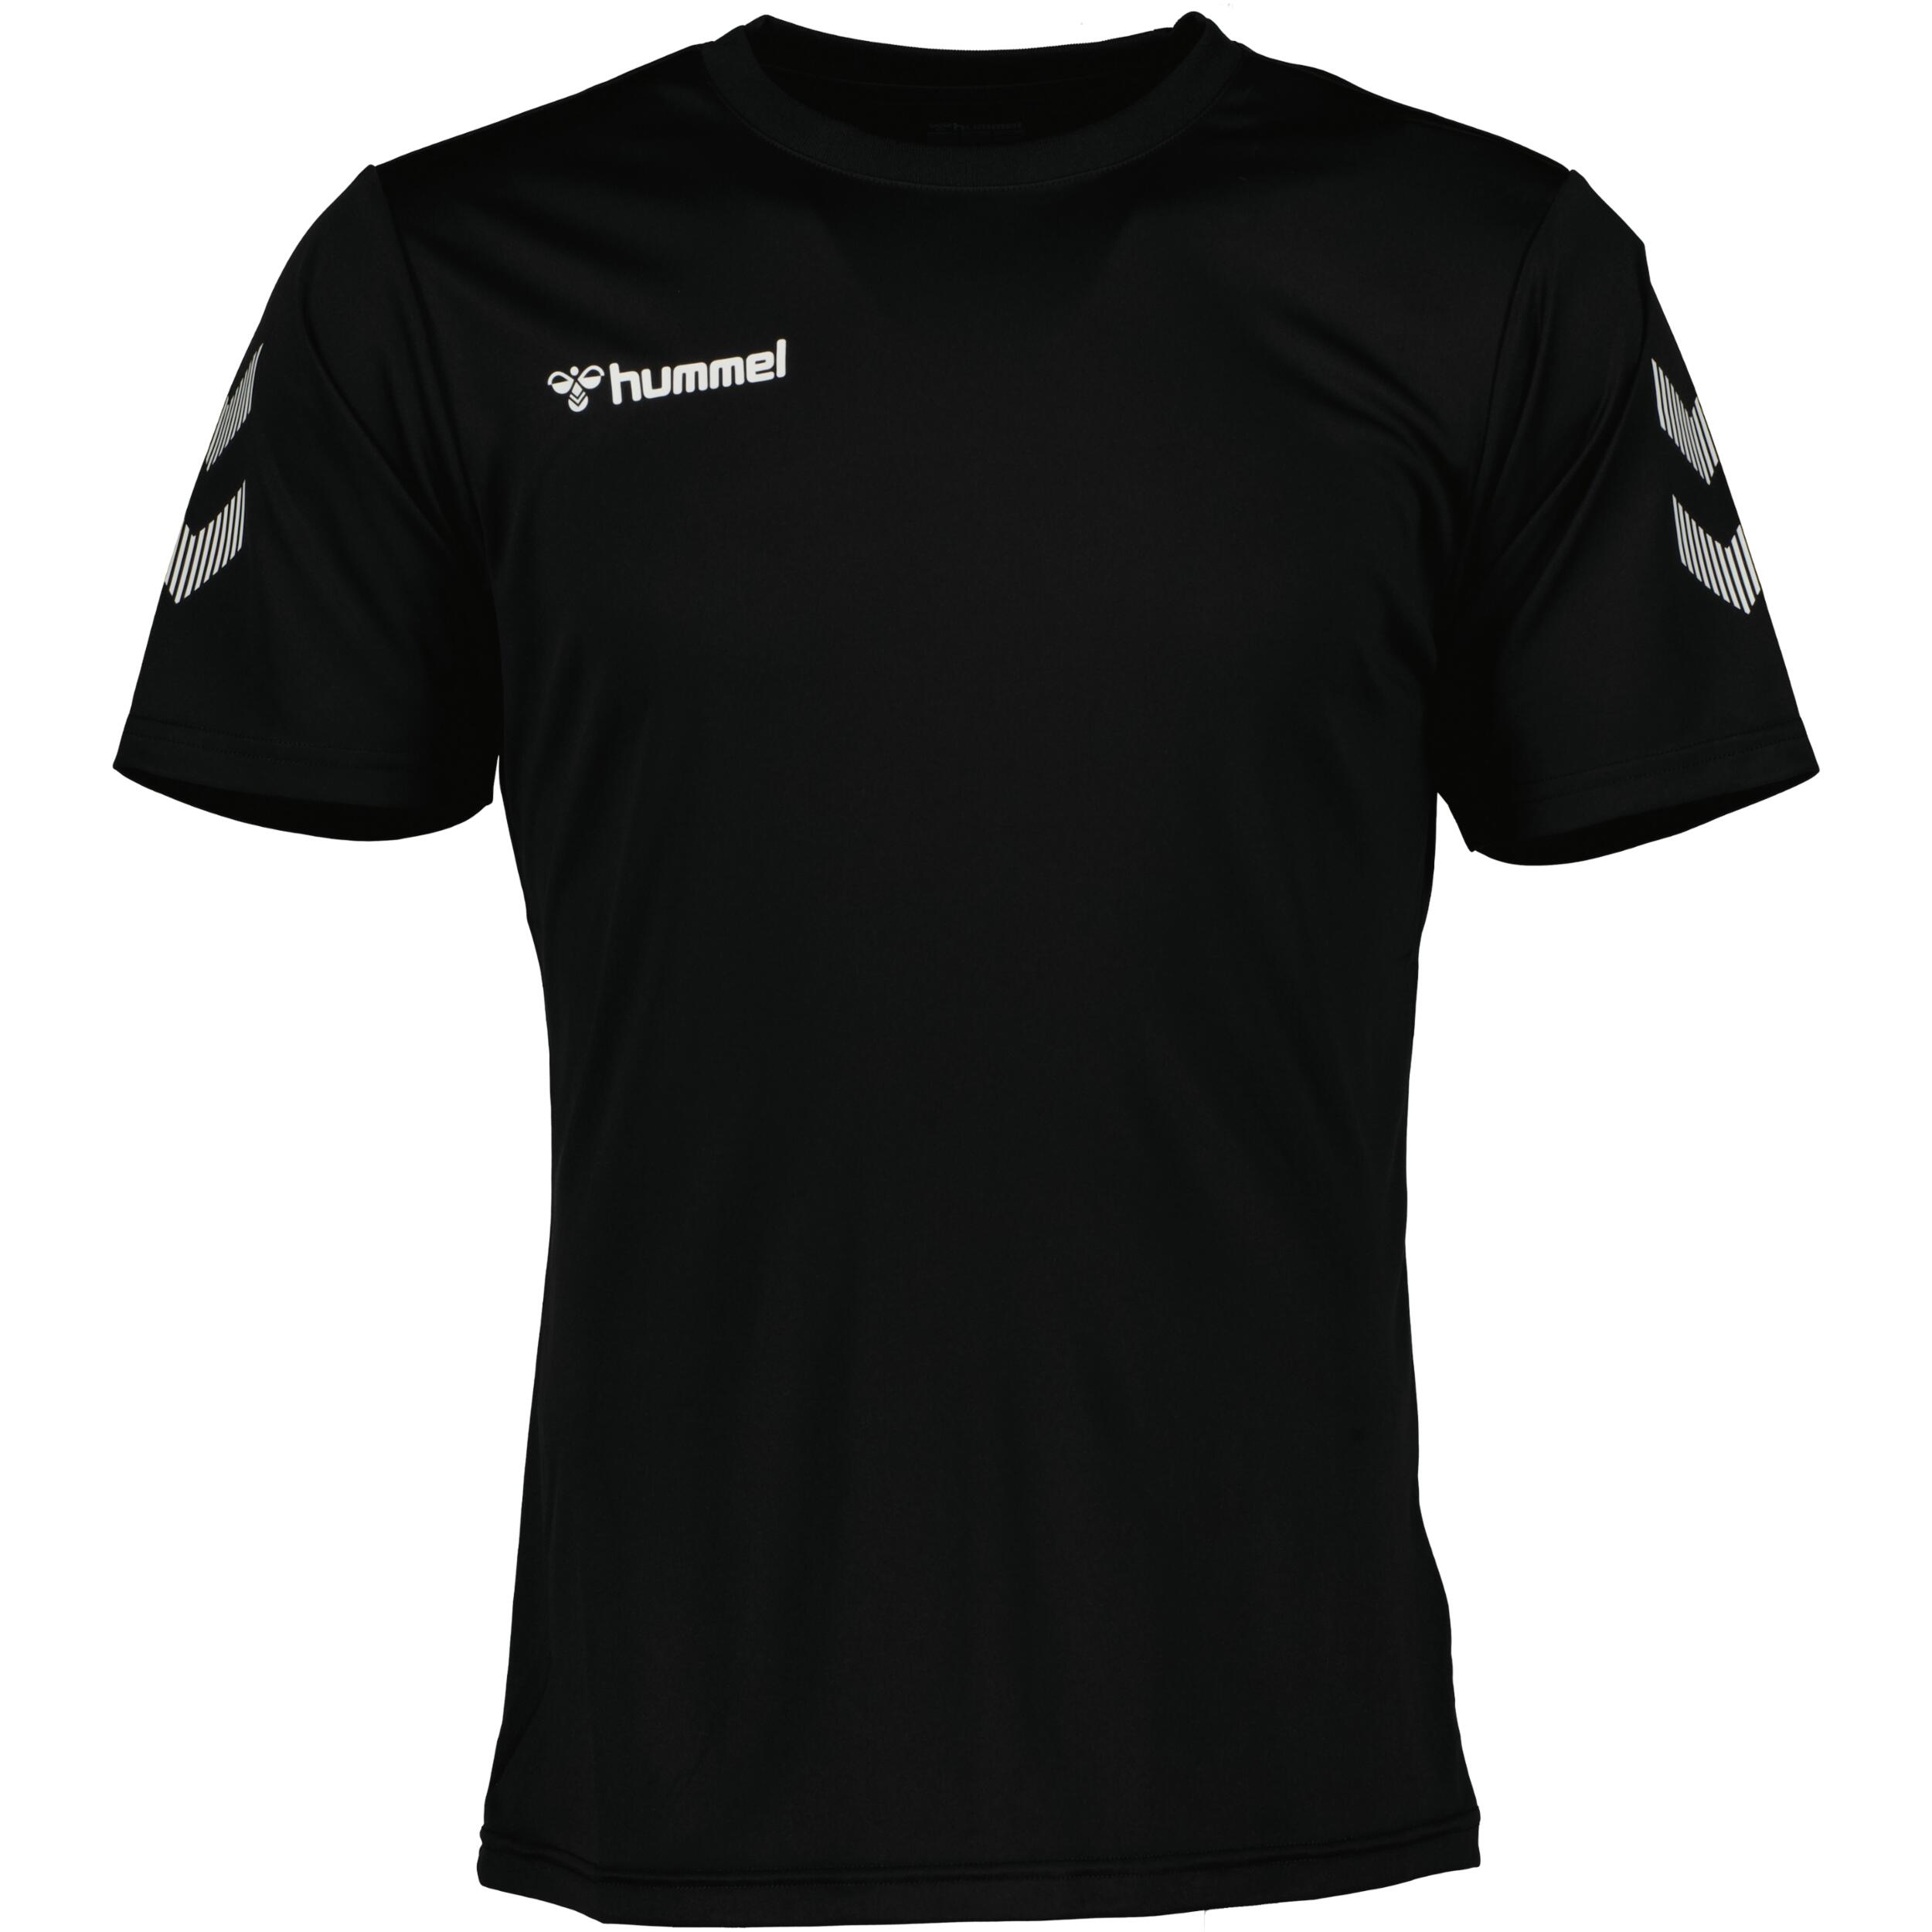 HUMMEL Solo jersey for men, great for football, in black